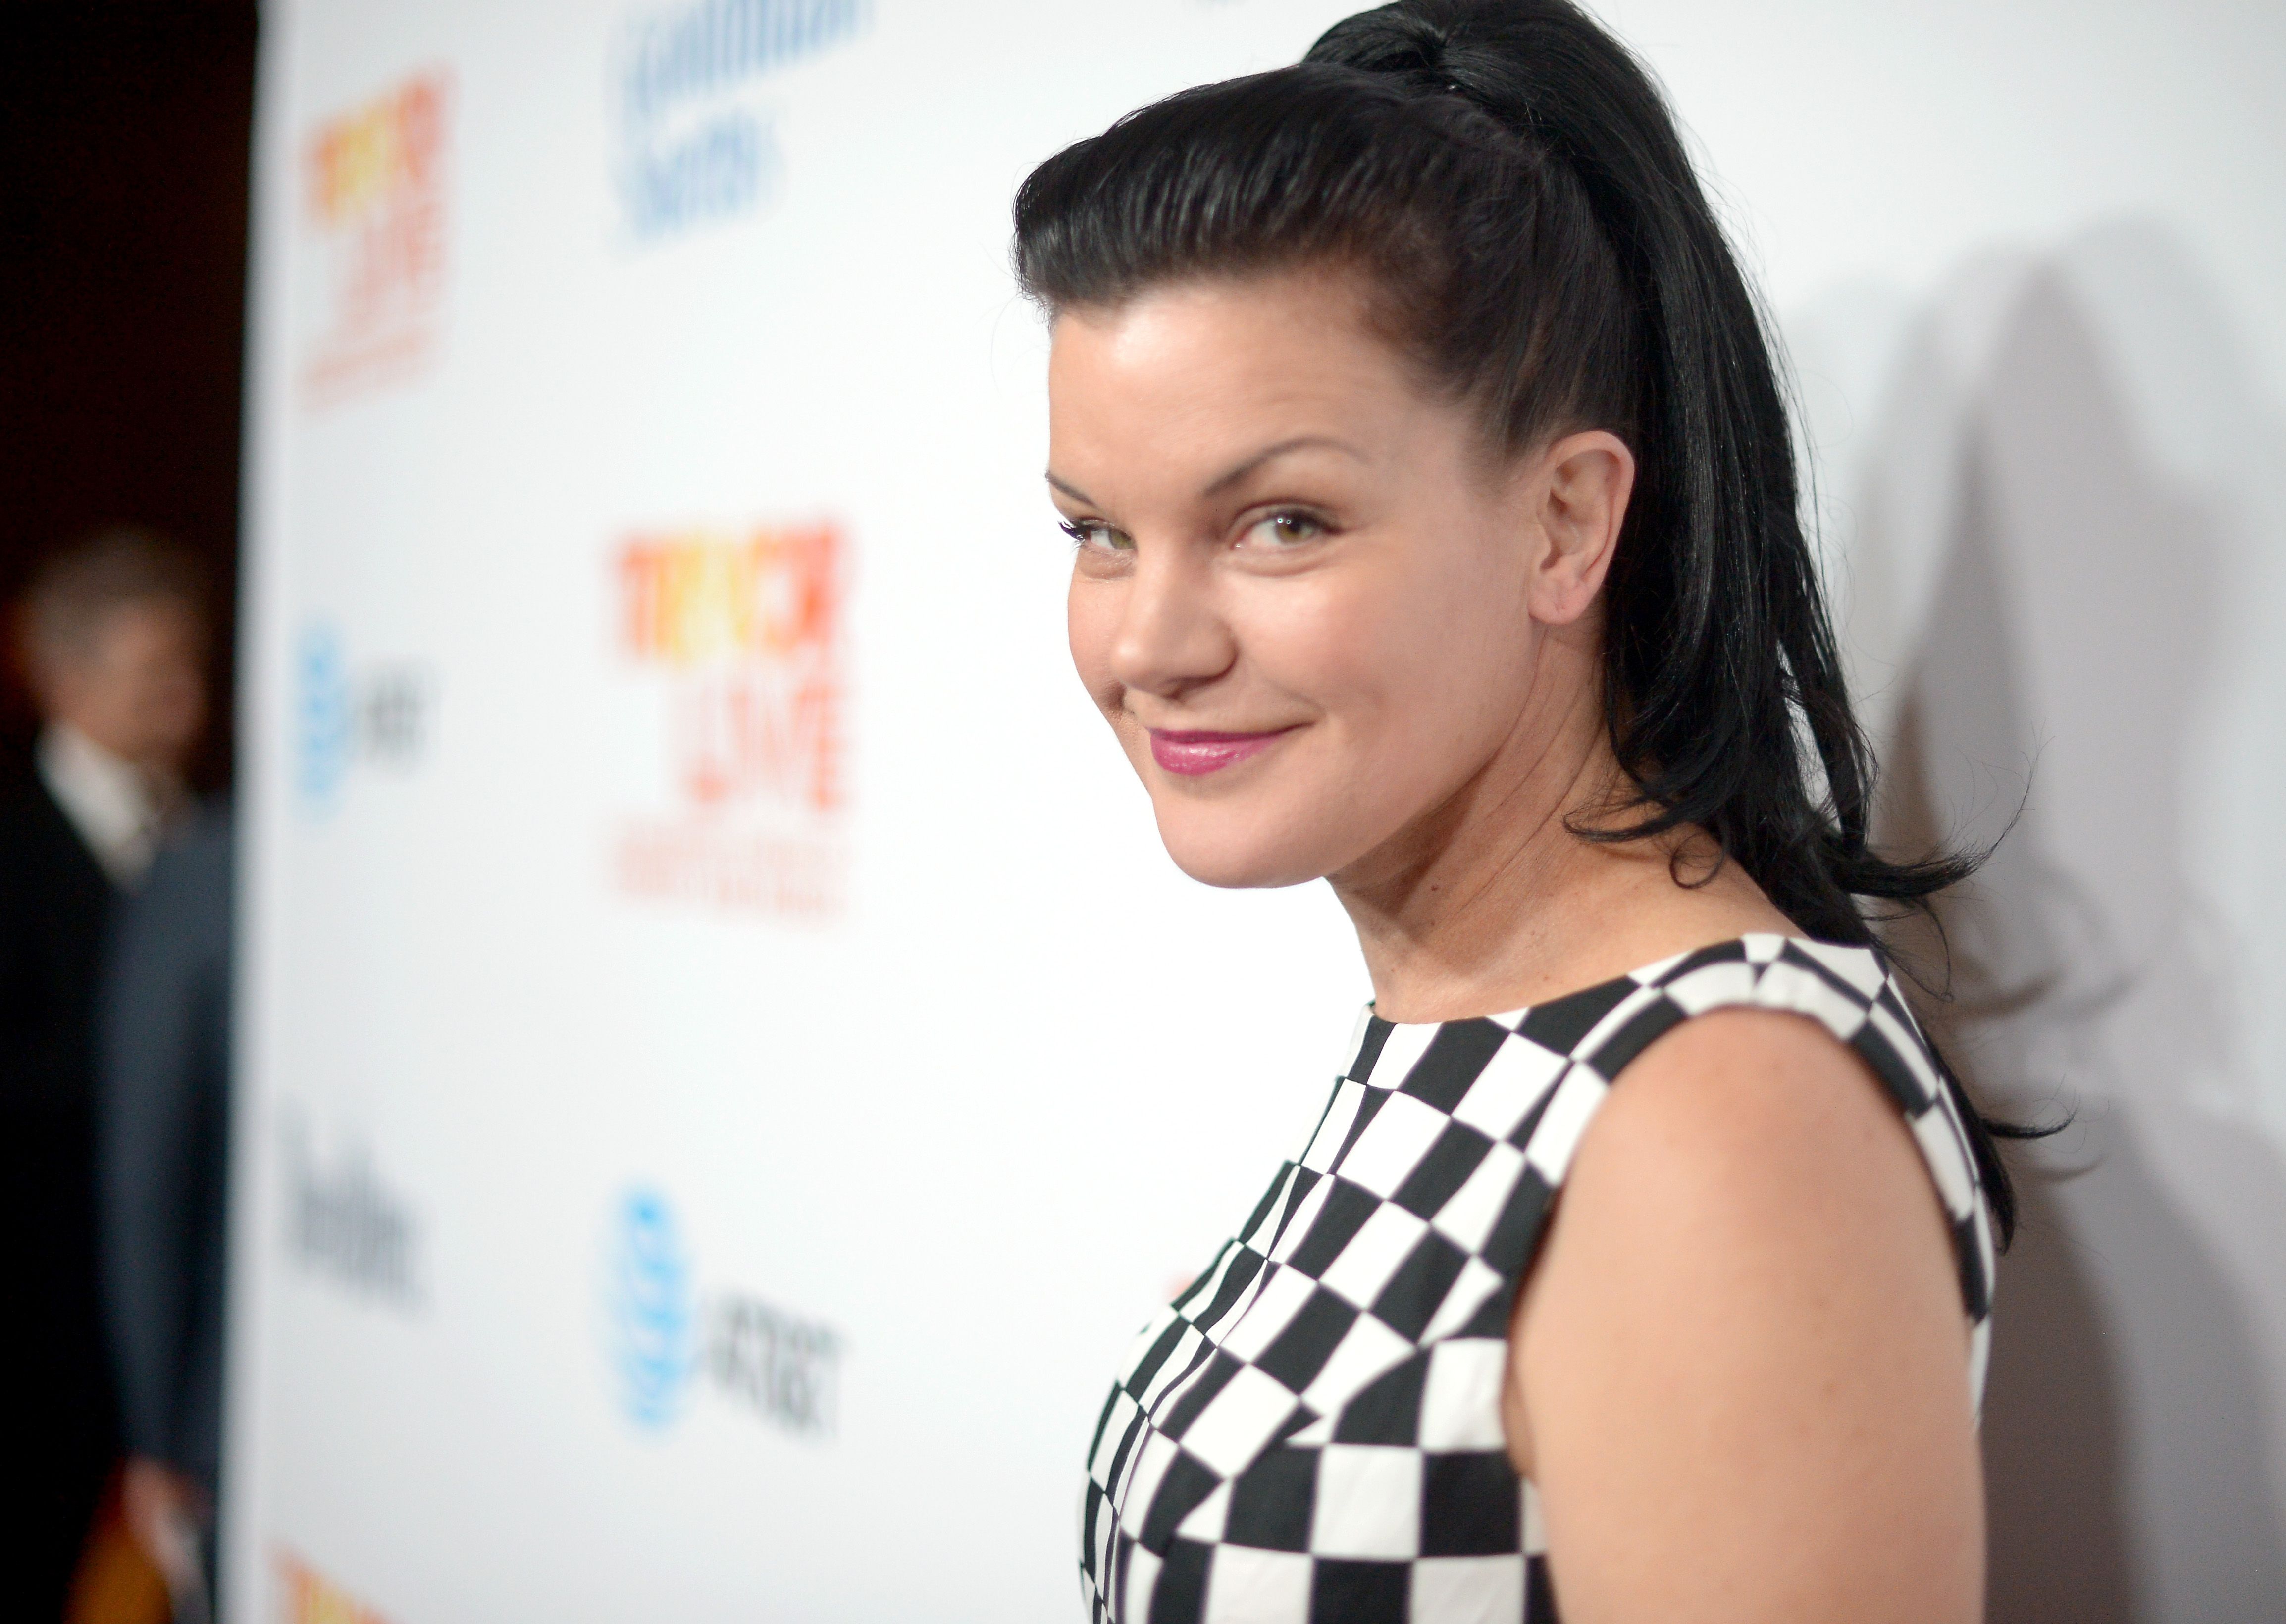 Pauley Perrette Calls Out Family Feud on Twitter for Being Too Filthy